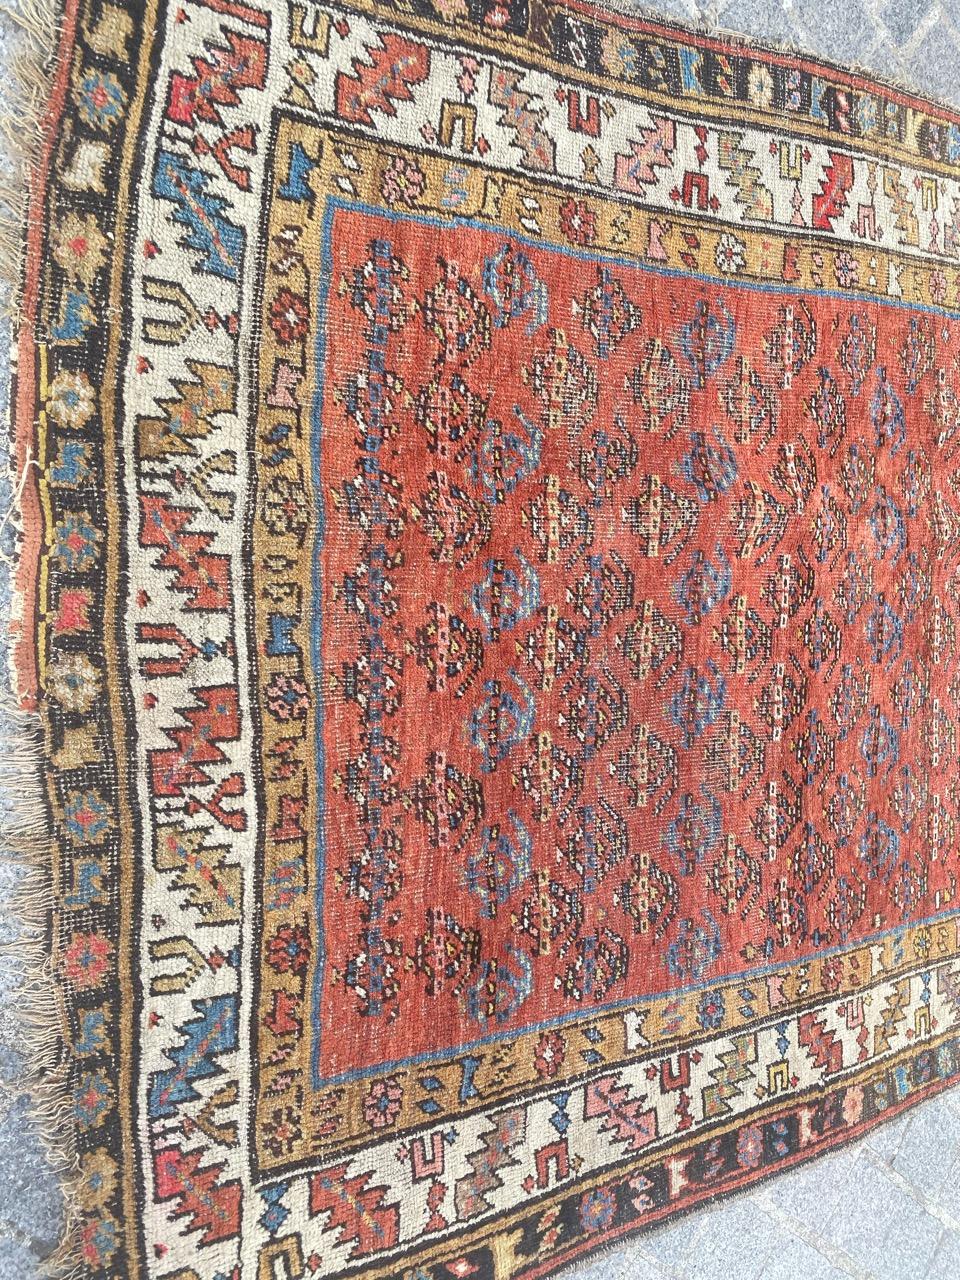 Very pretty 19th century Bijar rug with nice botteh design and beautiful natural colors, entirely hand knotted with wool velvet on wool foundation.

✨✨✨
